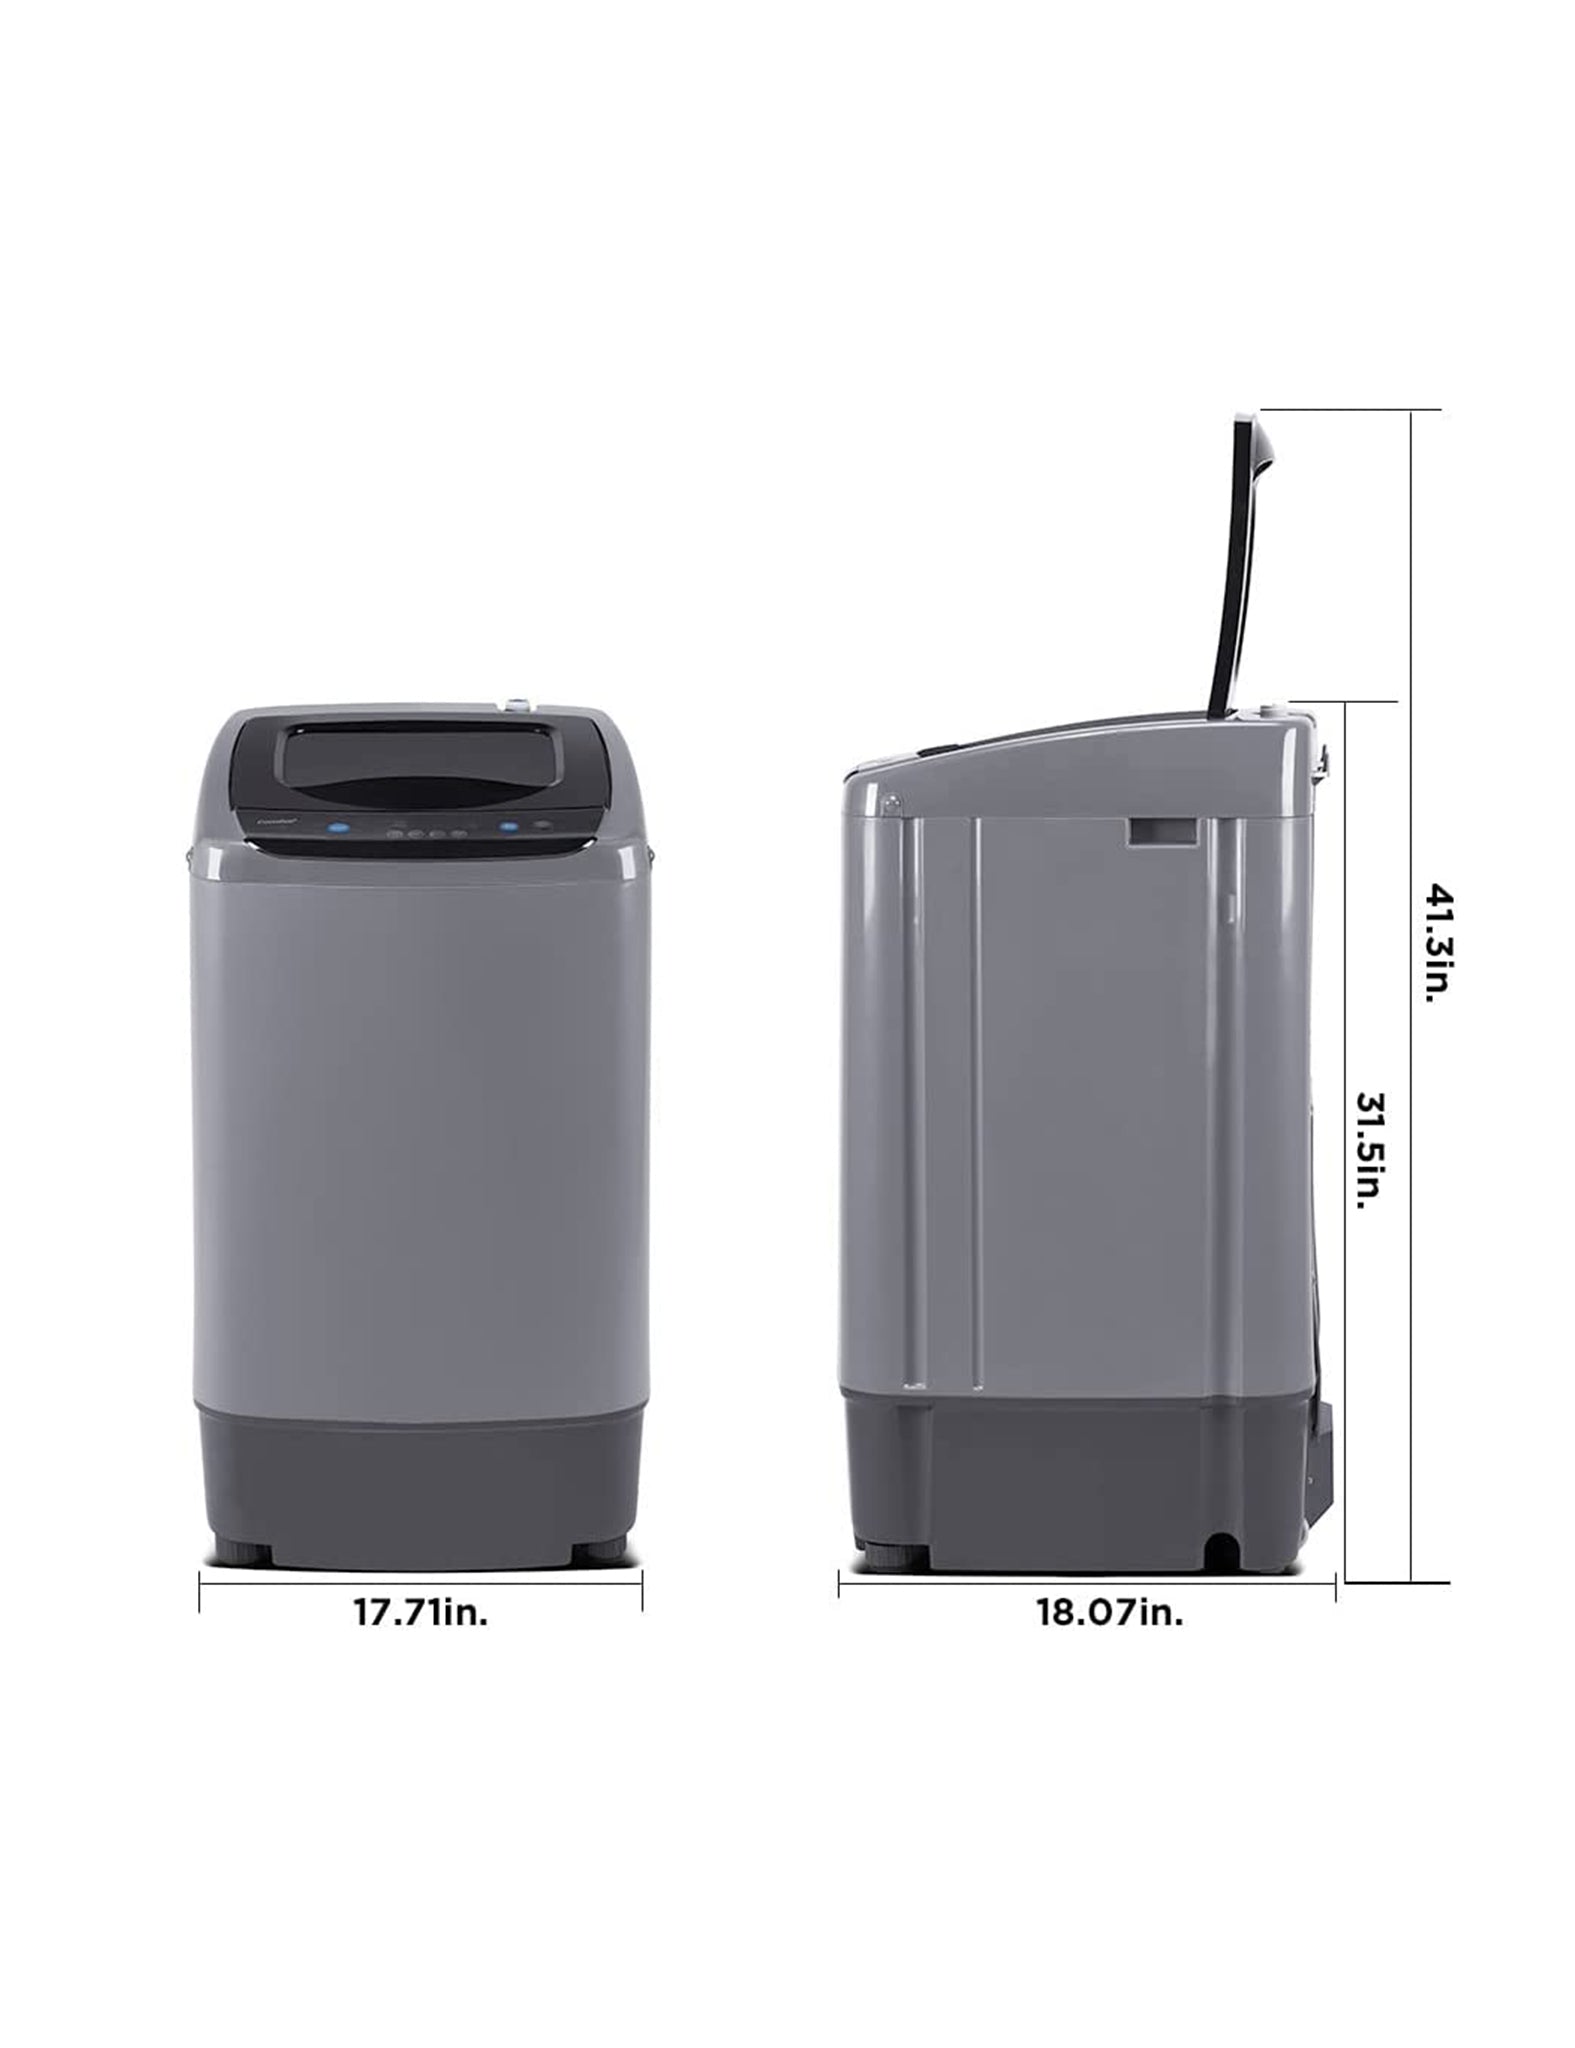 size dimensions of comfee portable washing machine